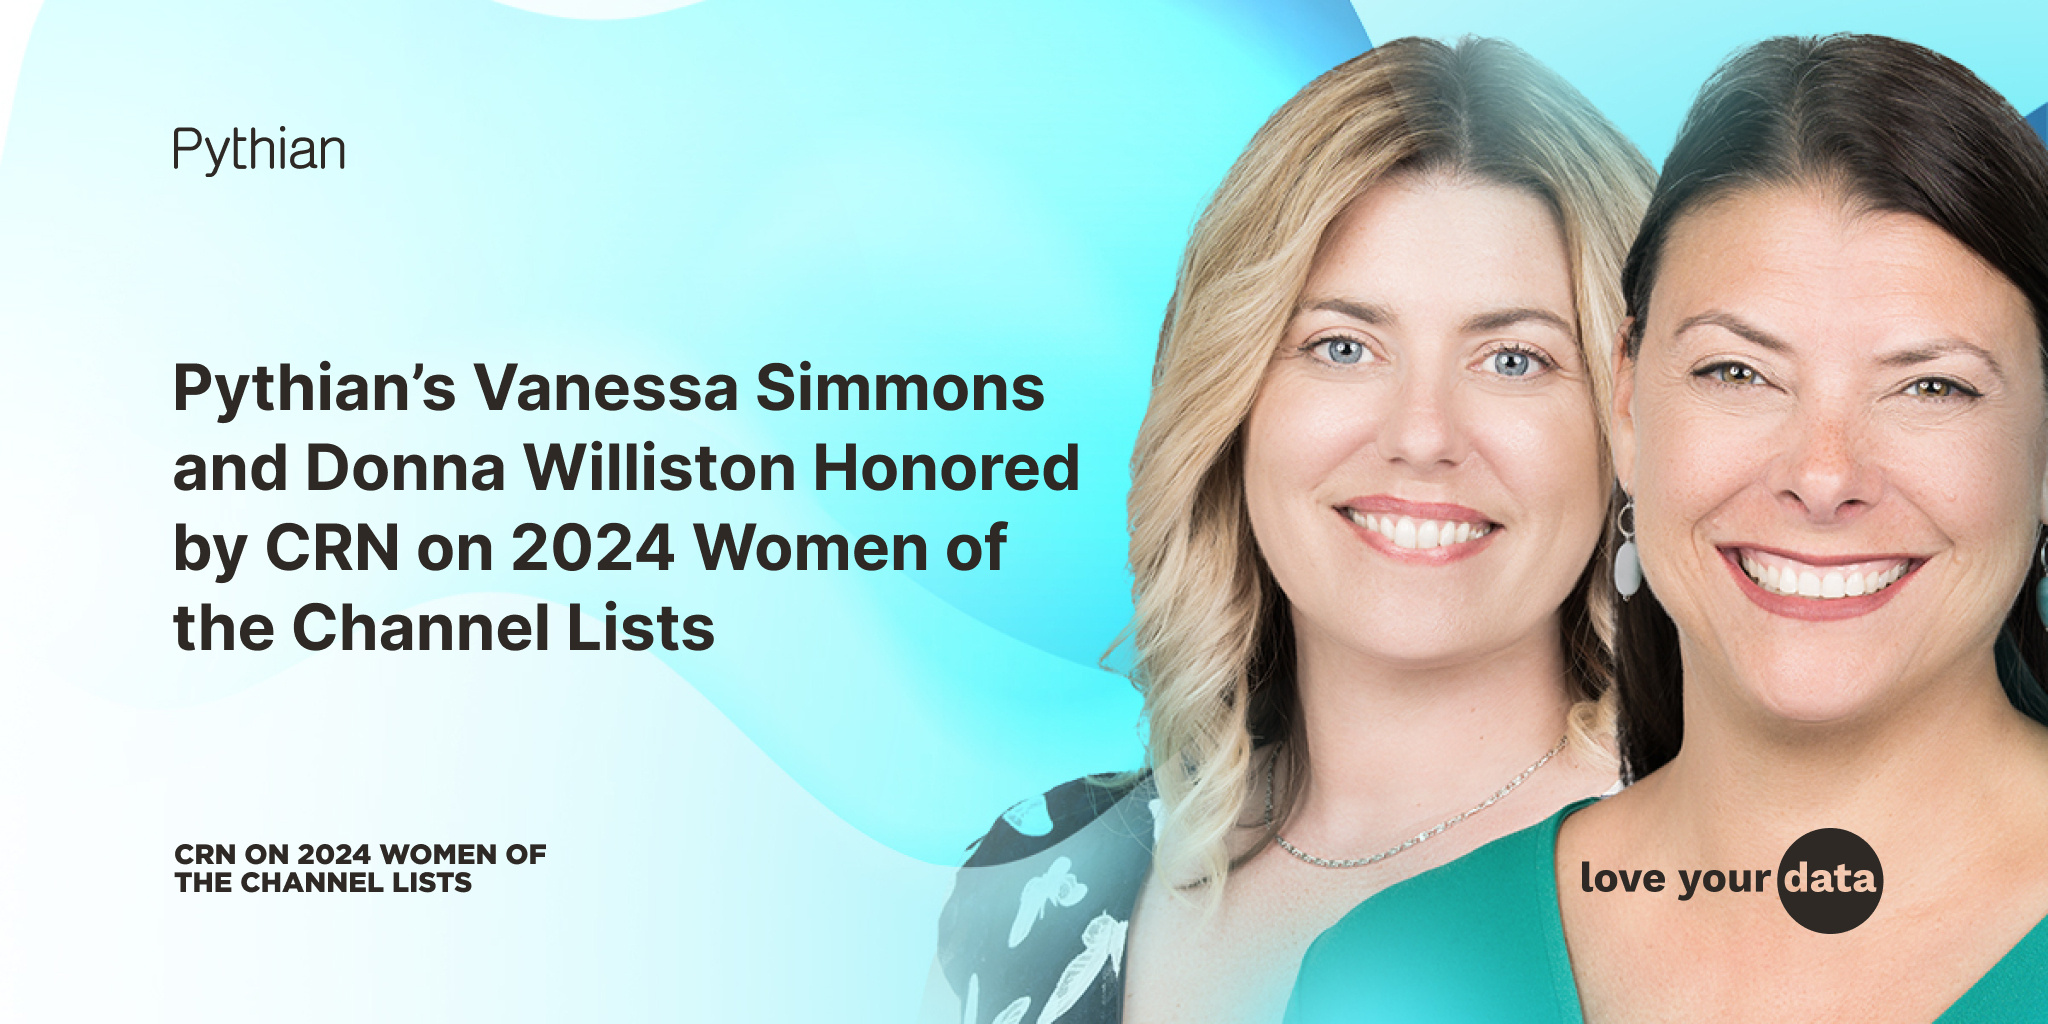 Pythian’s Vanessa Simmons and Donna Williston Honored by CRN on 2024